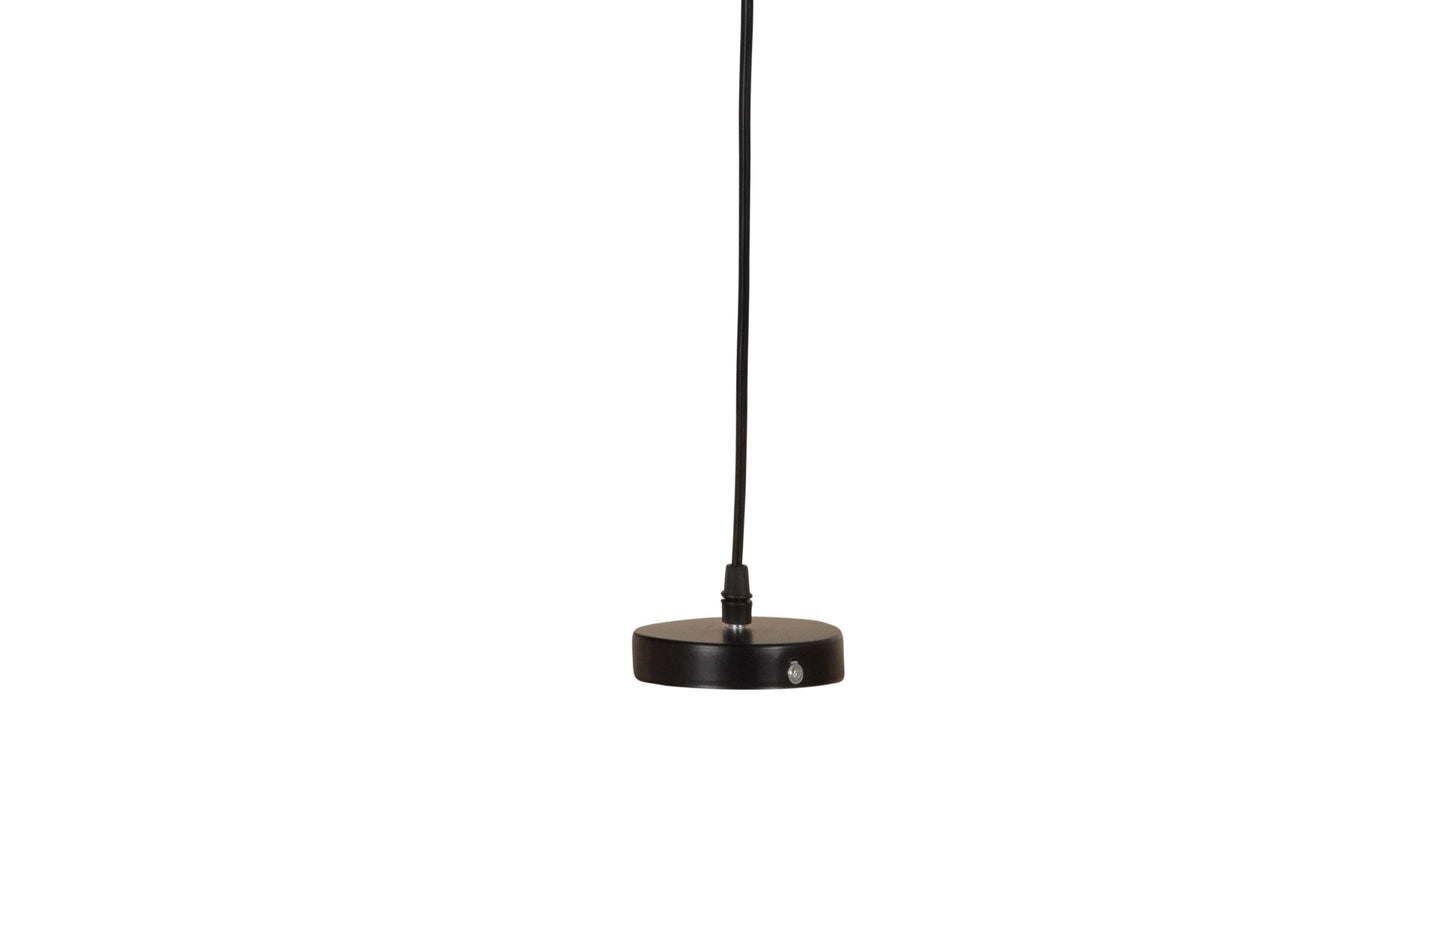 Moza - Loftlampe, Bamboo Natural 70x70cm / Outlet